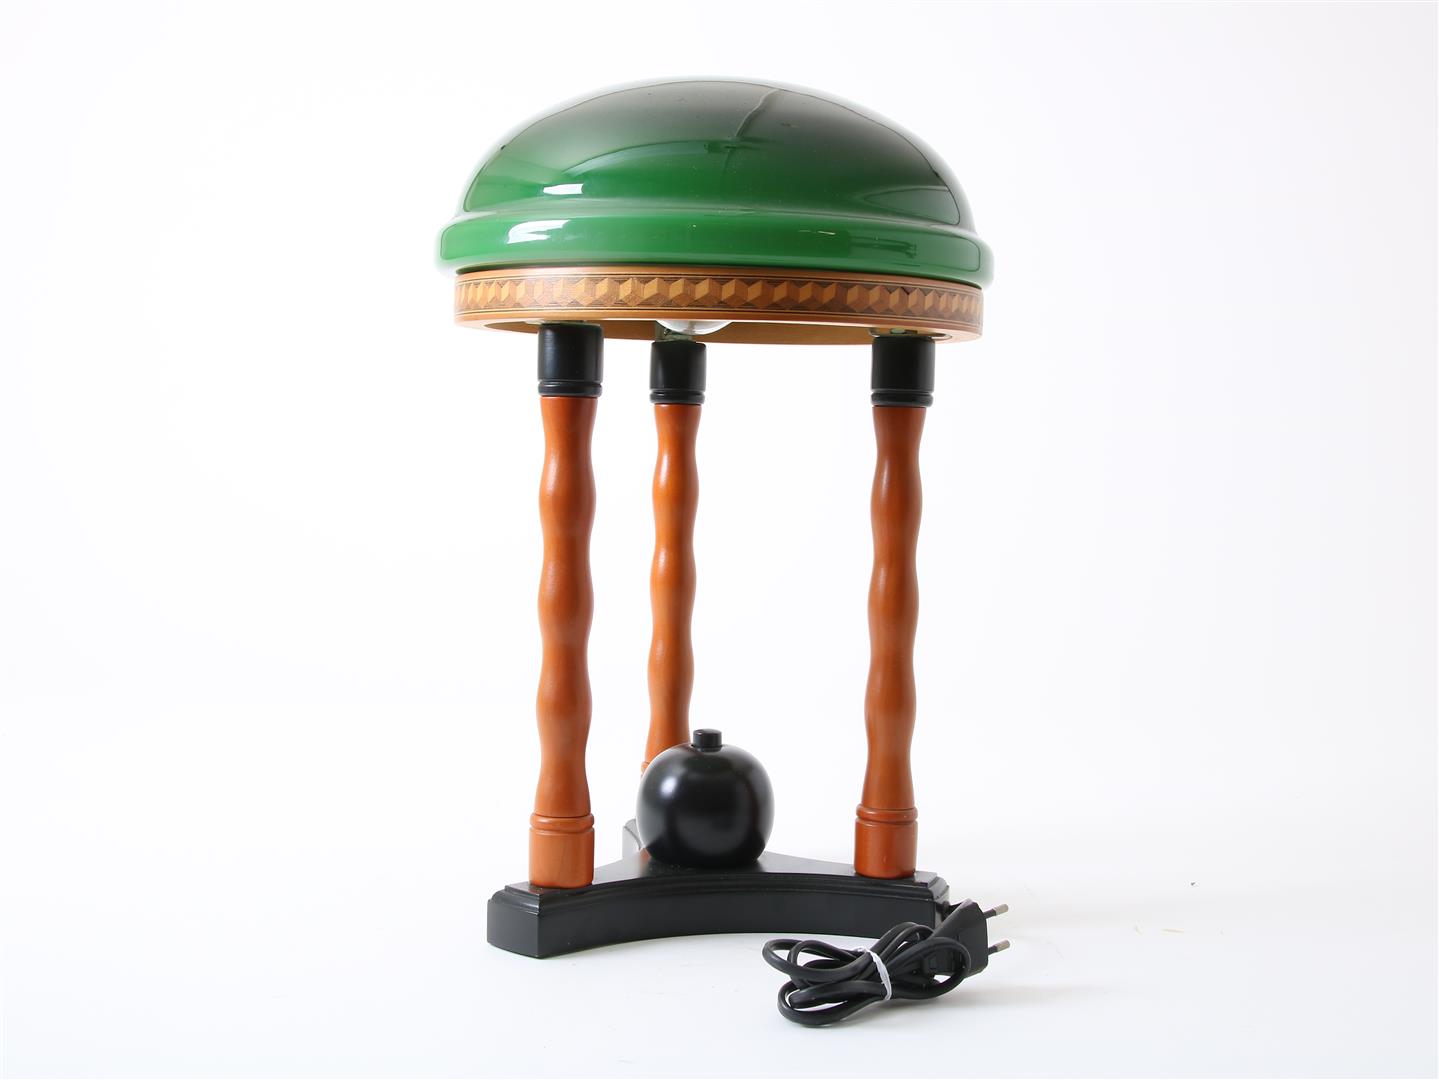 Table lamp on wooden base with green glass shade, manufacturer Tembe Leuchten, 1980s, height